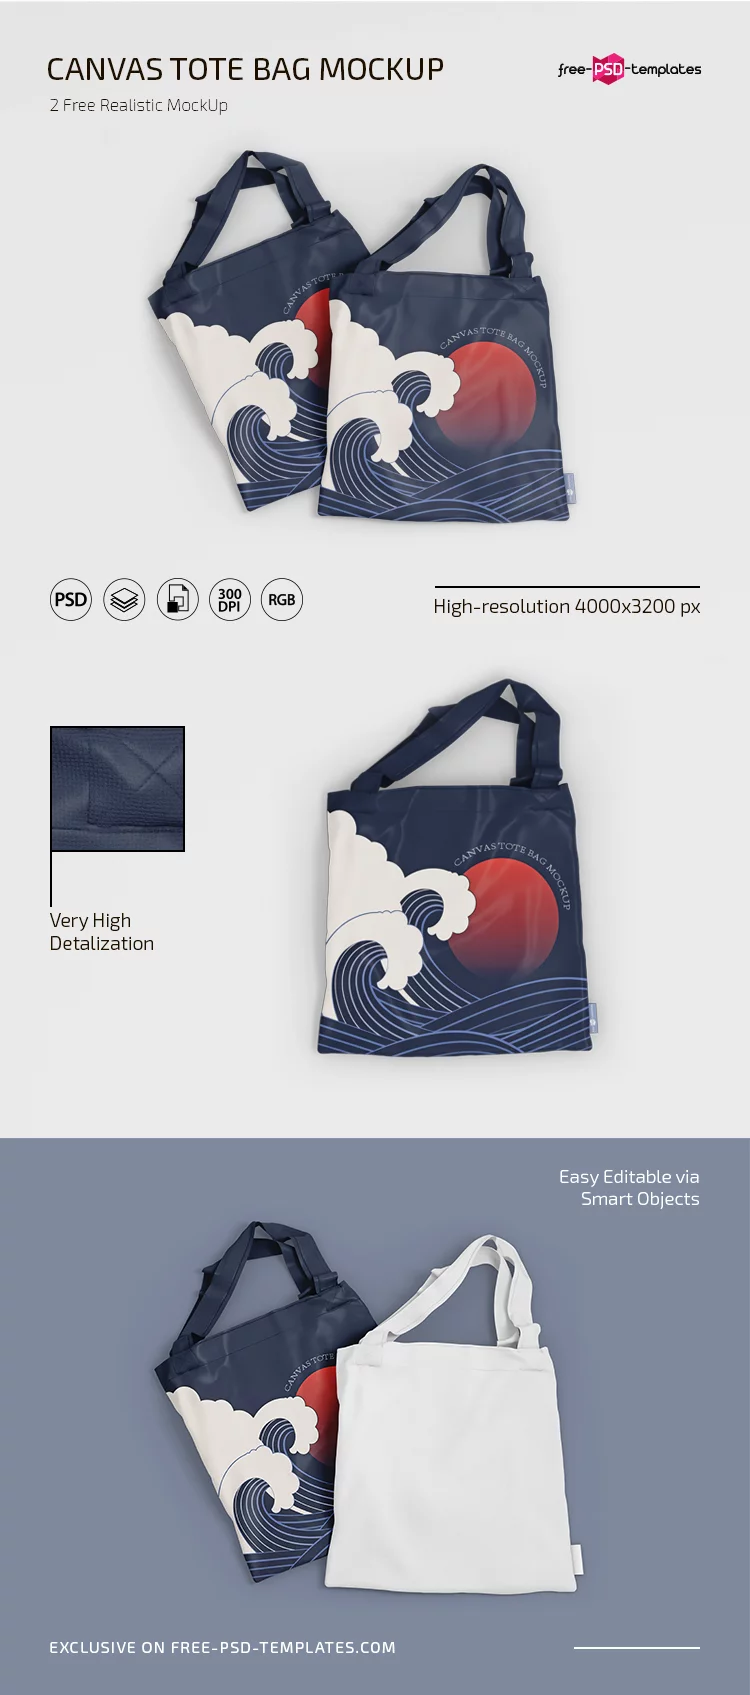 Free PSD Canvas Tote Bag Templates